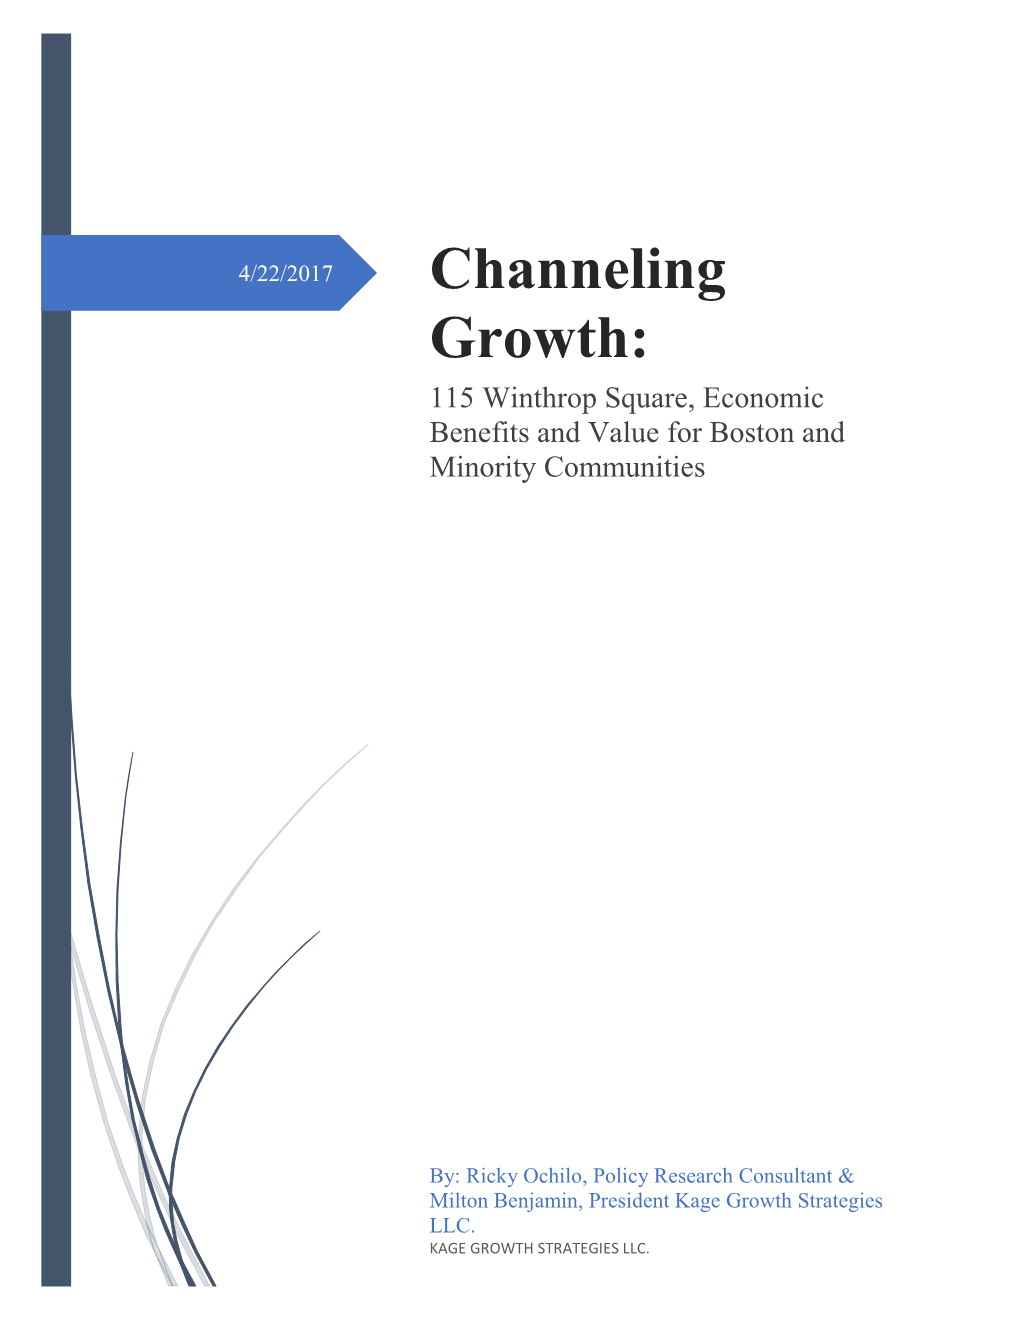 Channeling Growth: 115 Winthrop Square, Economic Benefits and Value for Boston and Minority Communities